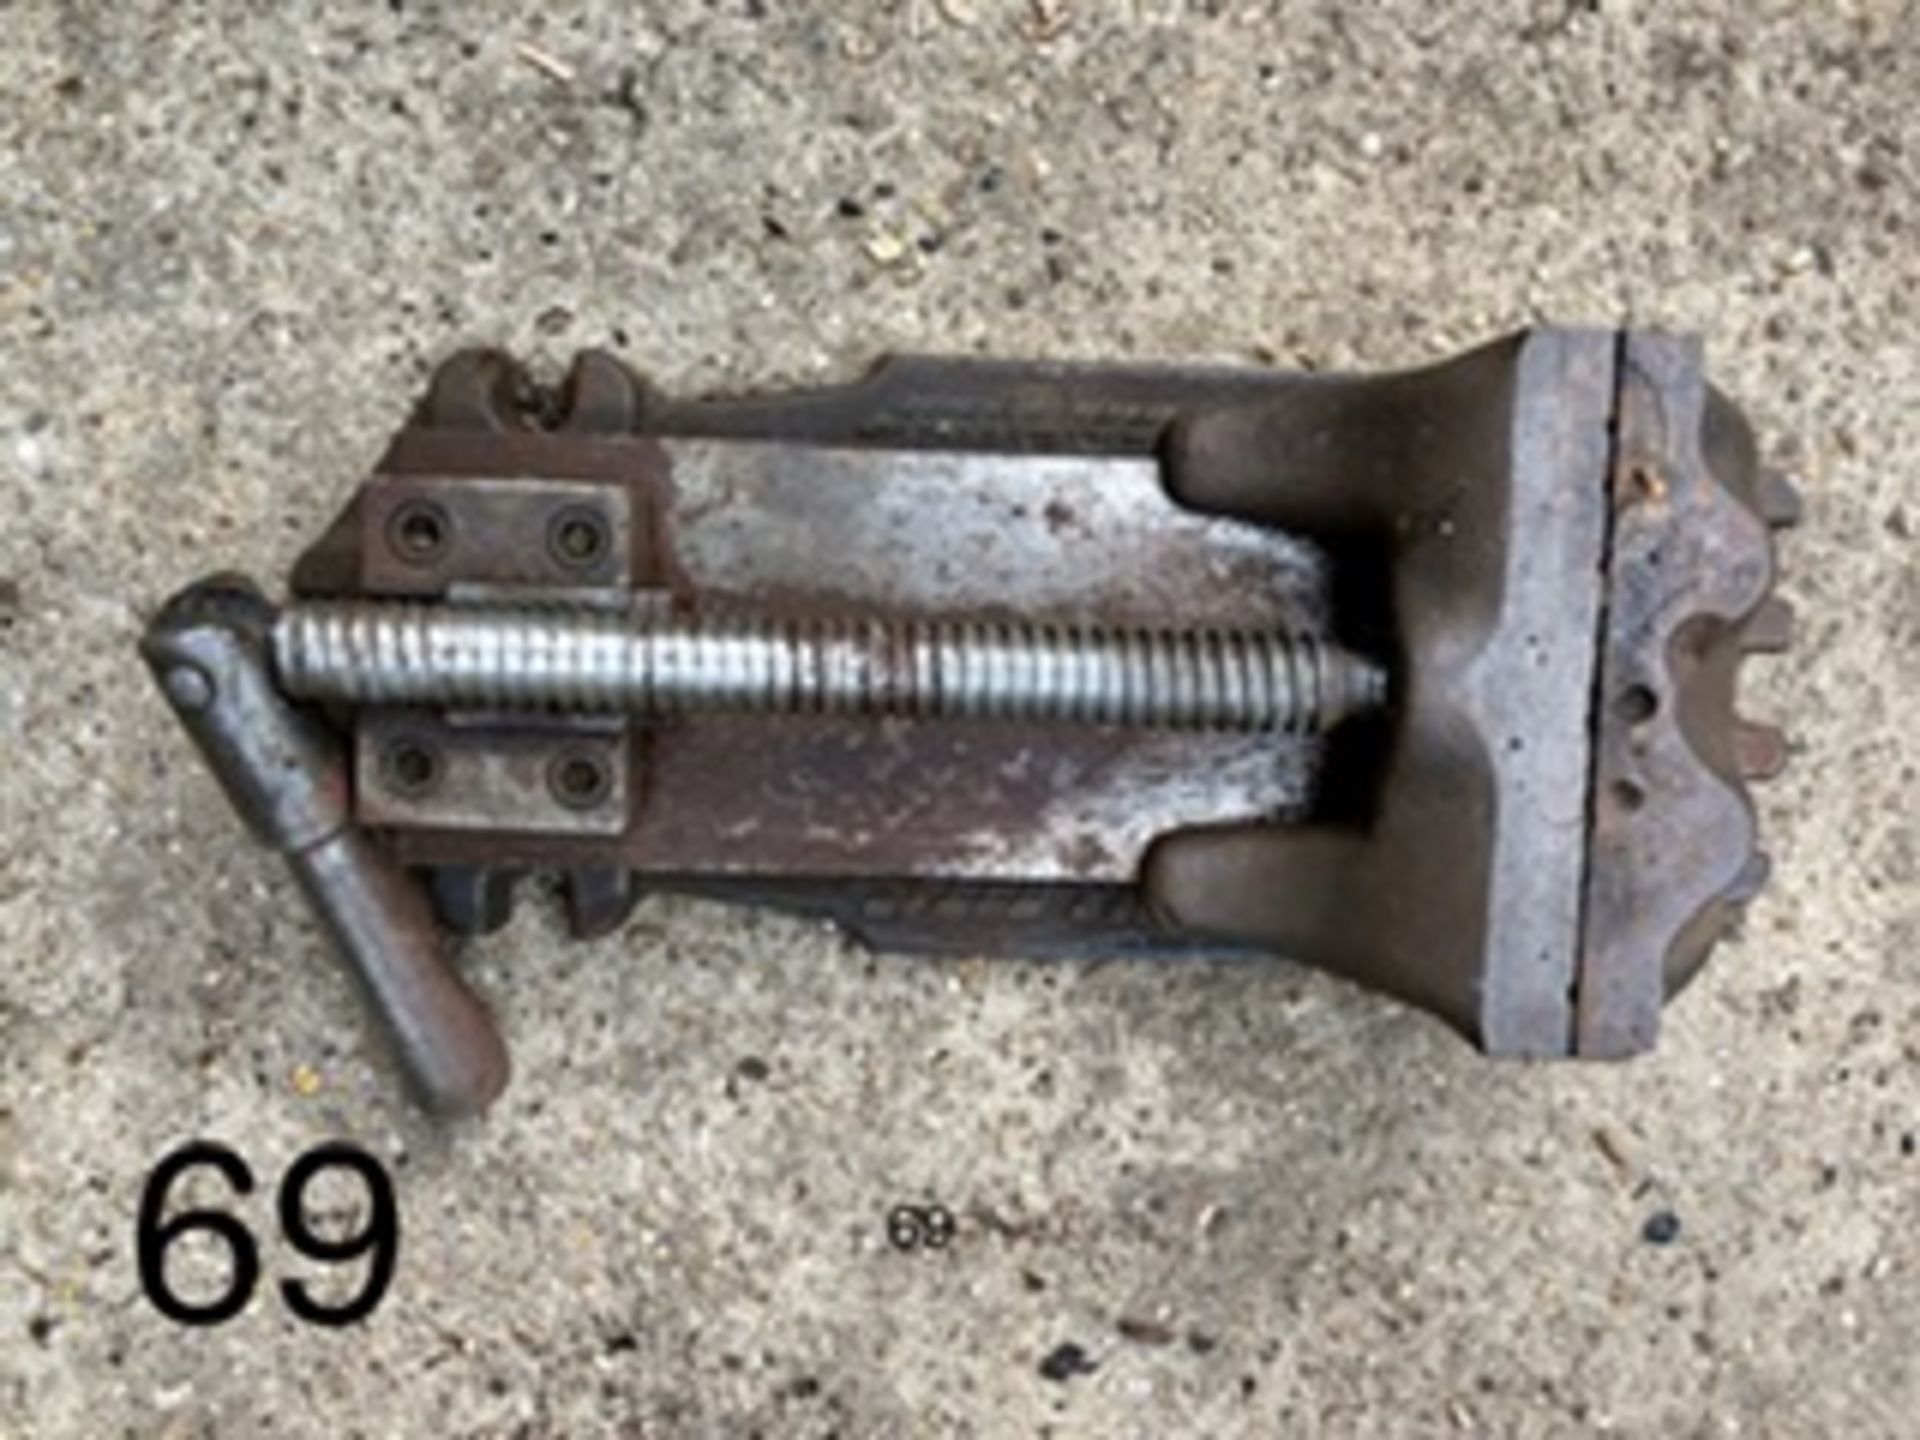 Vice, Speed vice, large for lathe. Stored near Gorleston, Norfolk No VAT on this item.